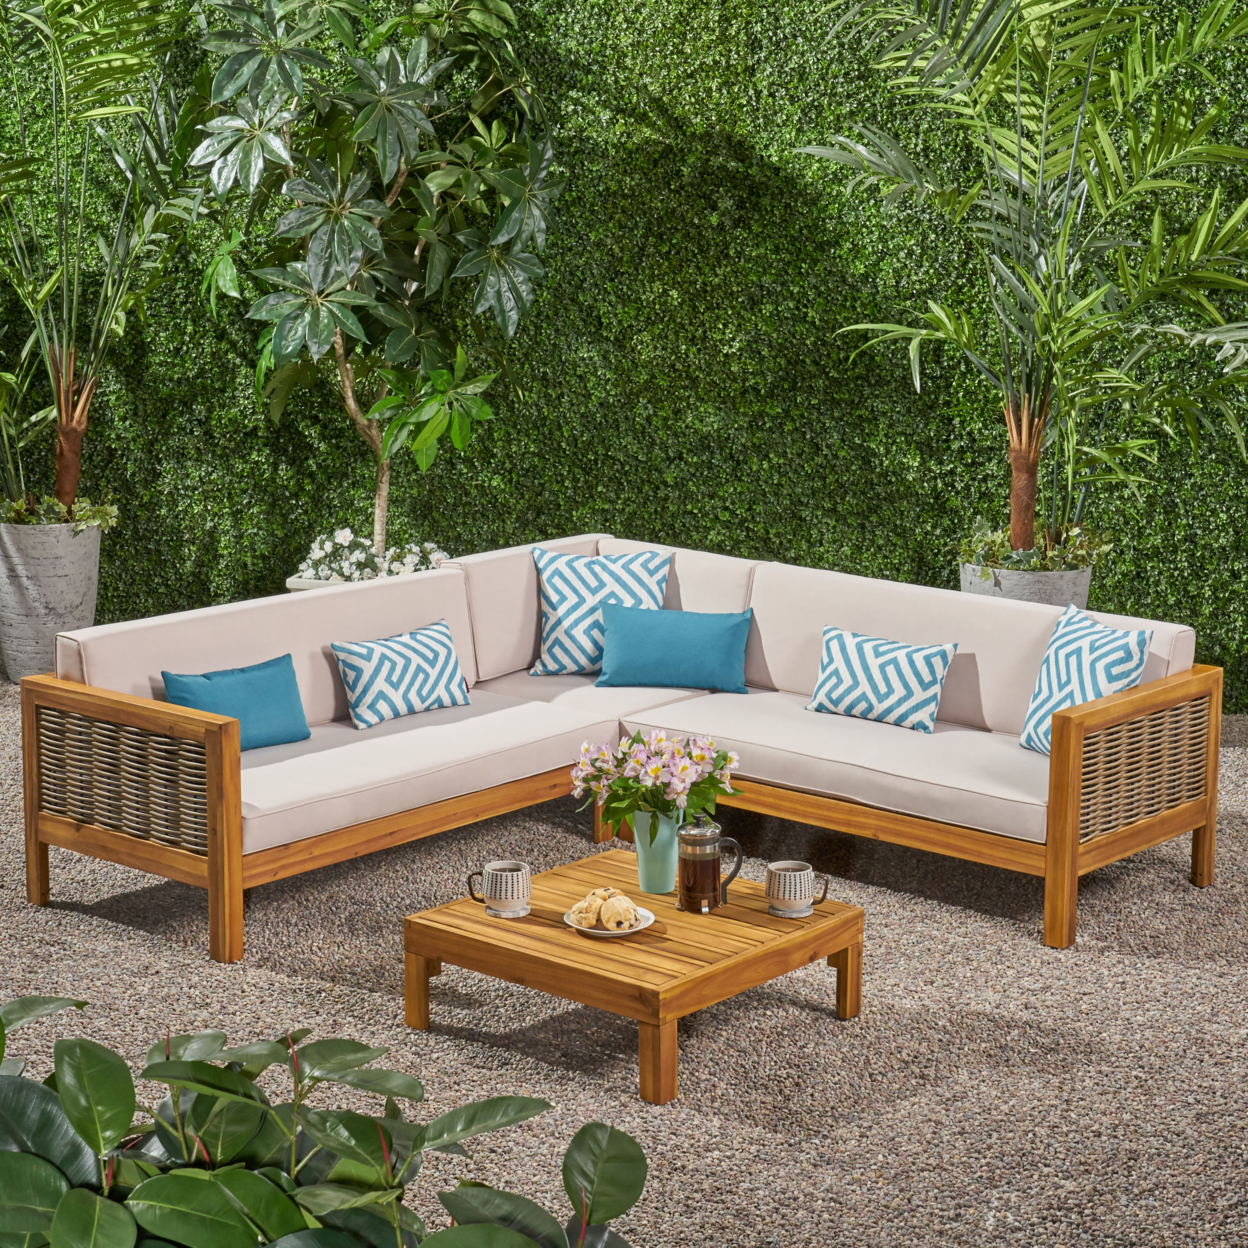 Elizabeth Outdoor Wood And Wicker 5 Seater Sectional Sofa And Coffee Table Set - Gray, Mixed Brown, Dark Gray